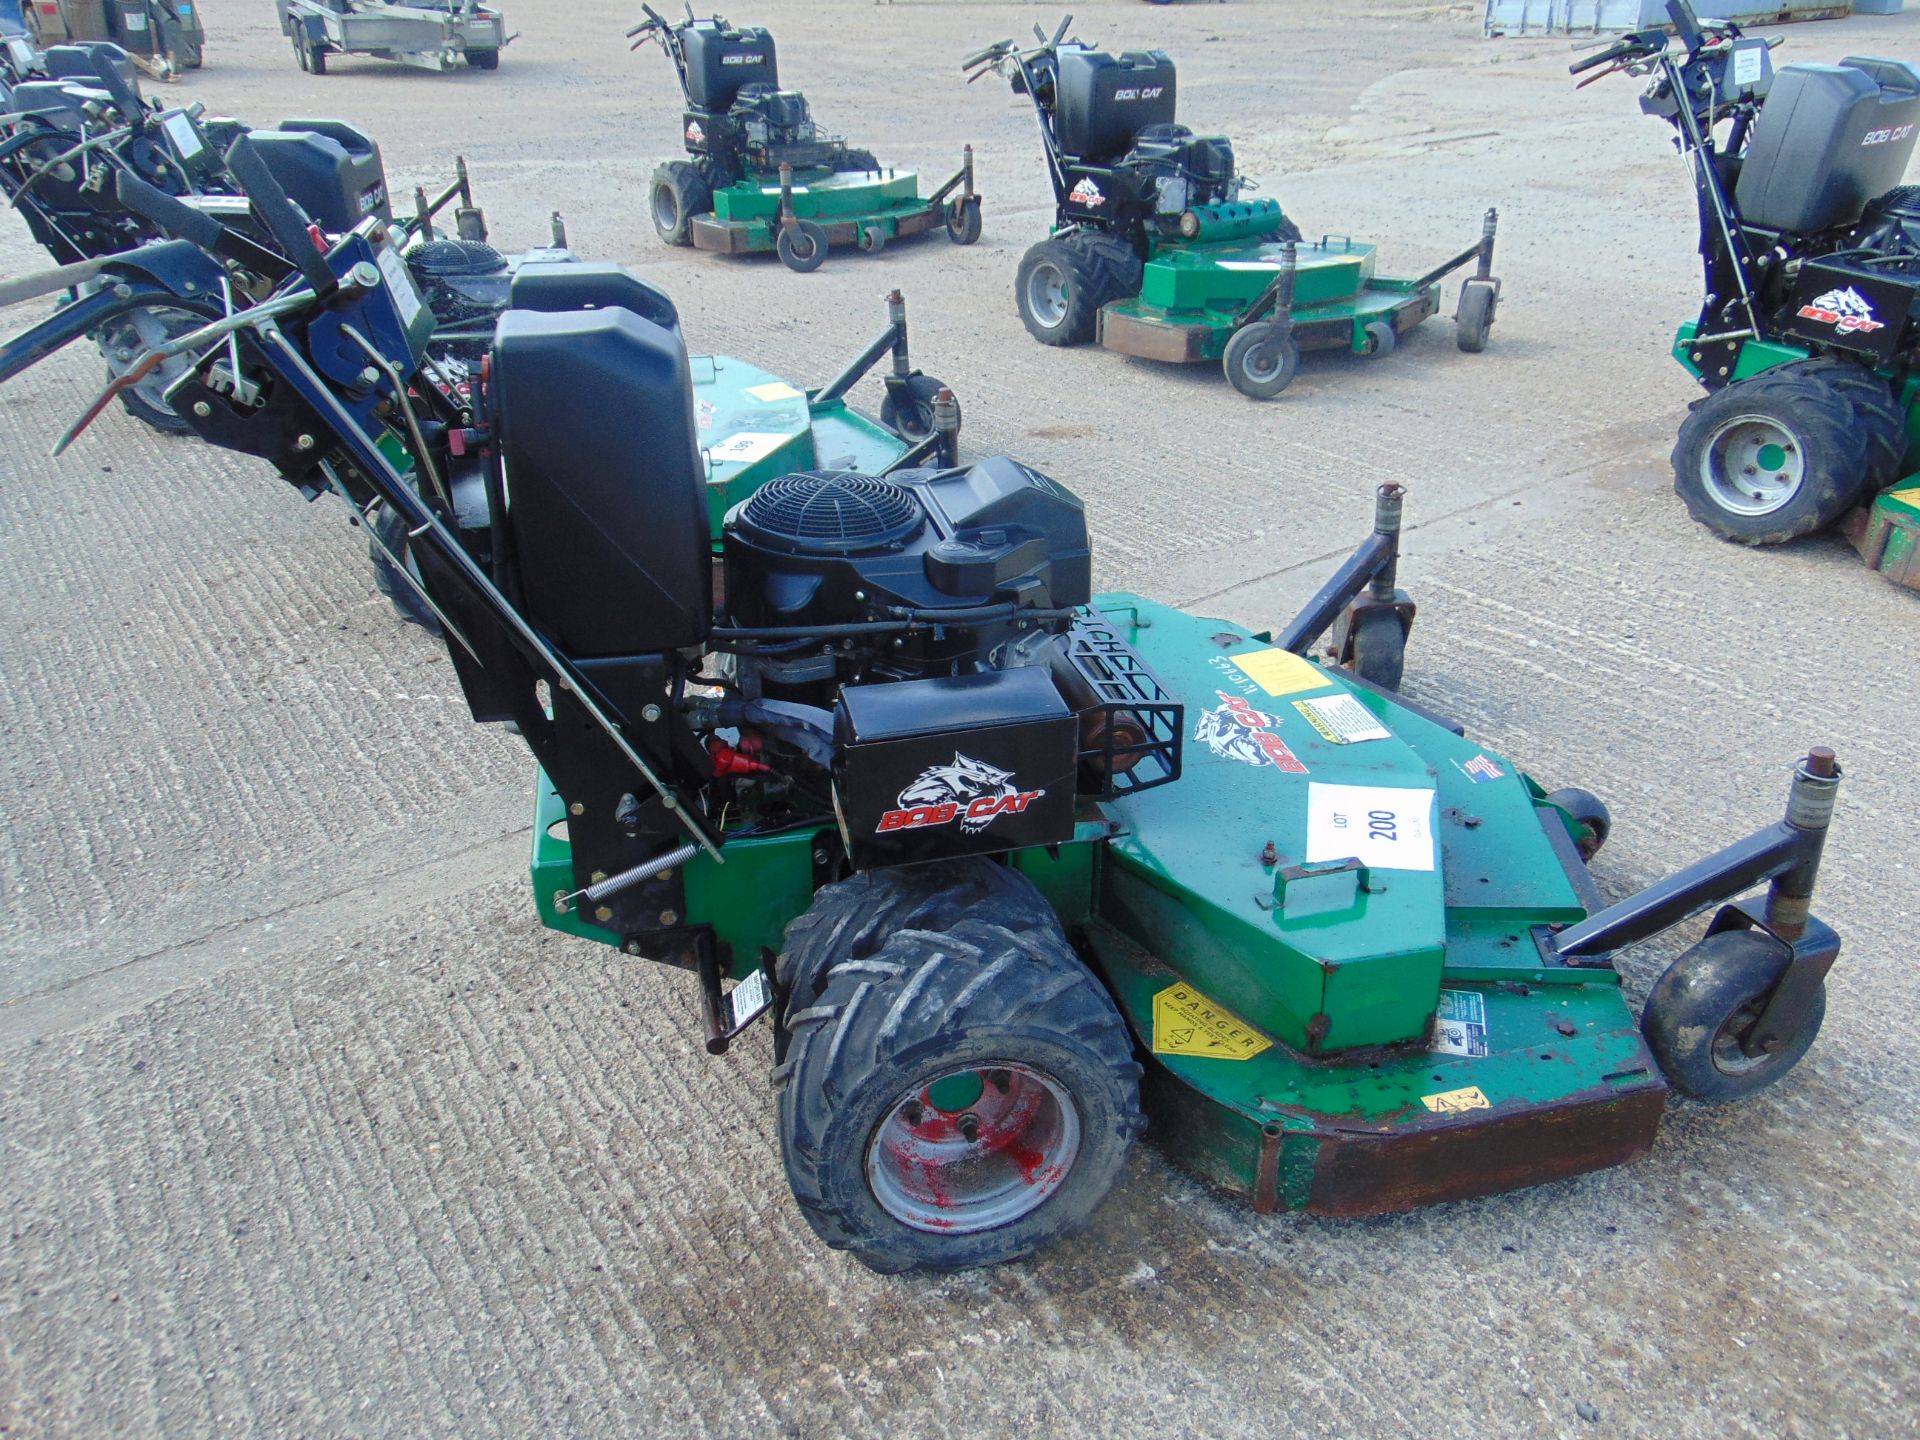 2015 BOBCAT HYDRODRIVE 52 INCHES MOWER FROM UK GOVT CONTRACT. 1000 HOURS ONLY - Image 3 of 9